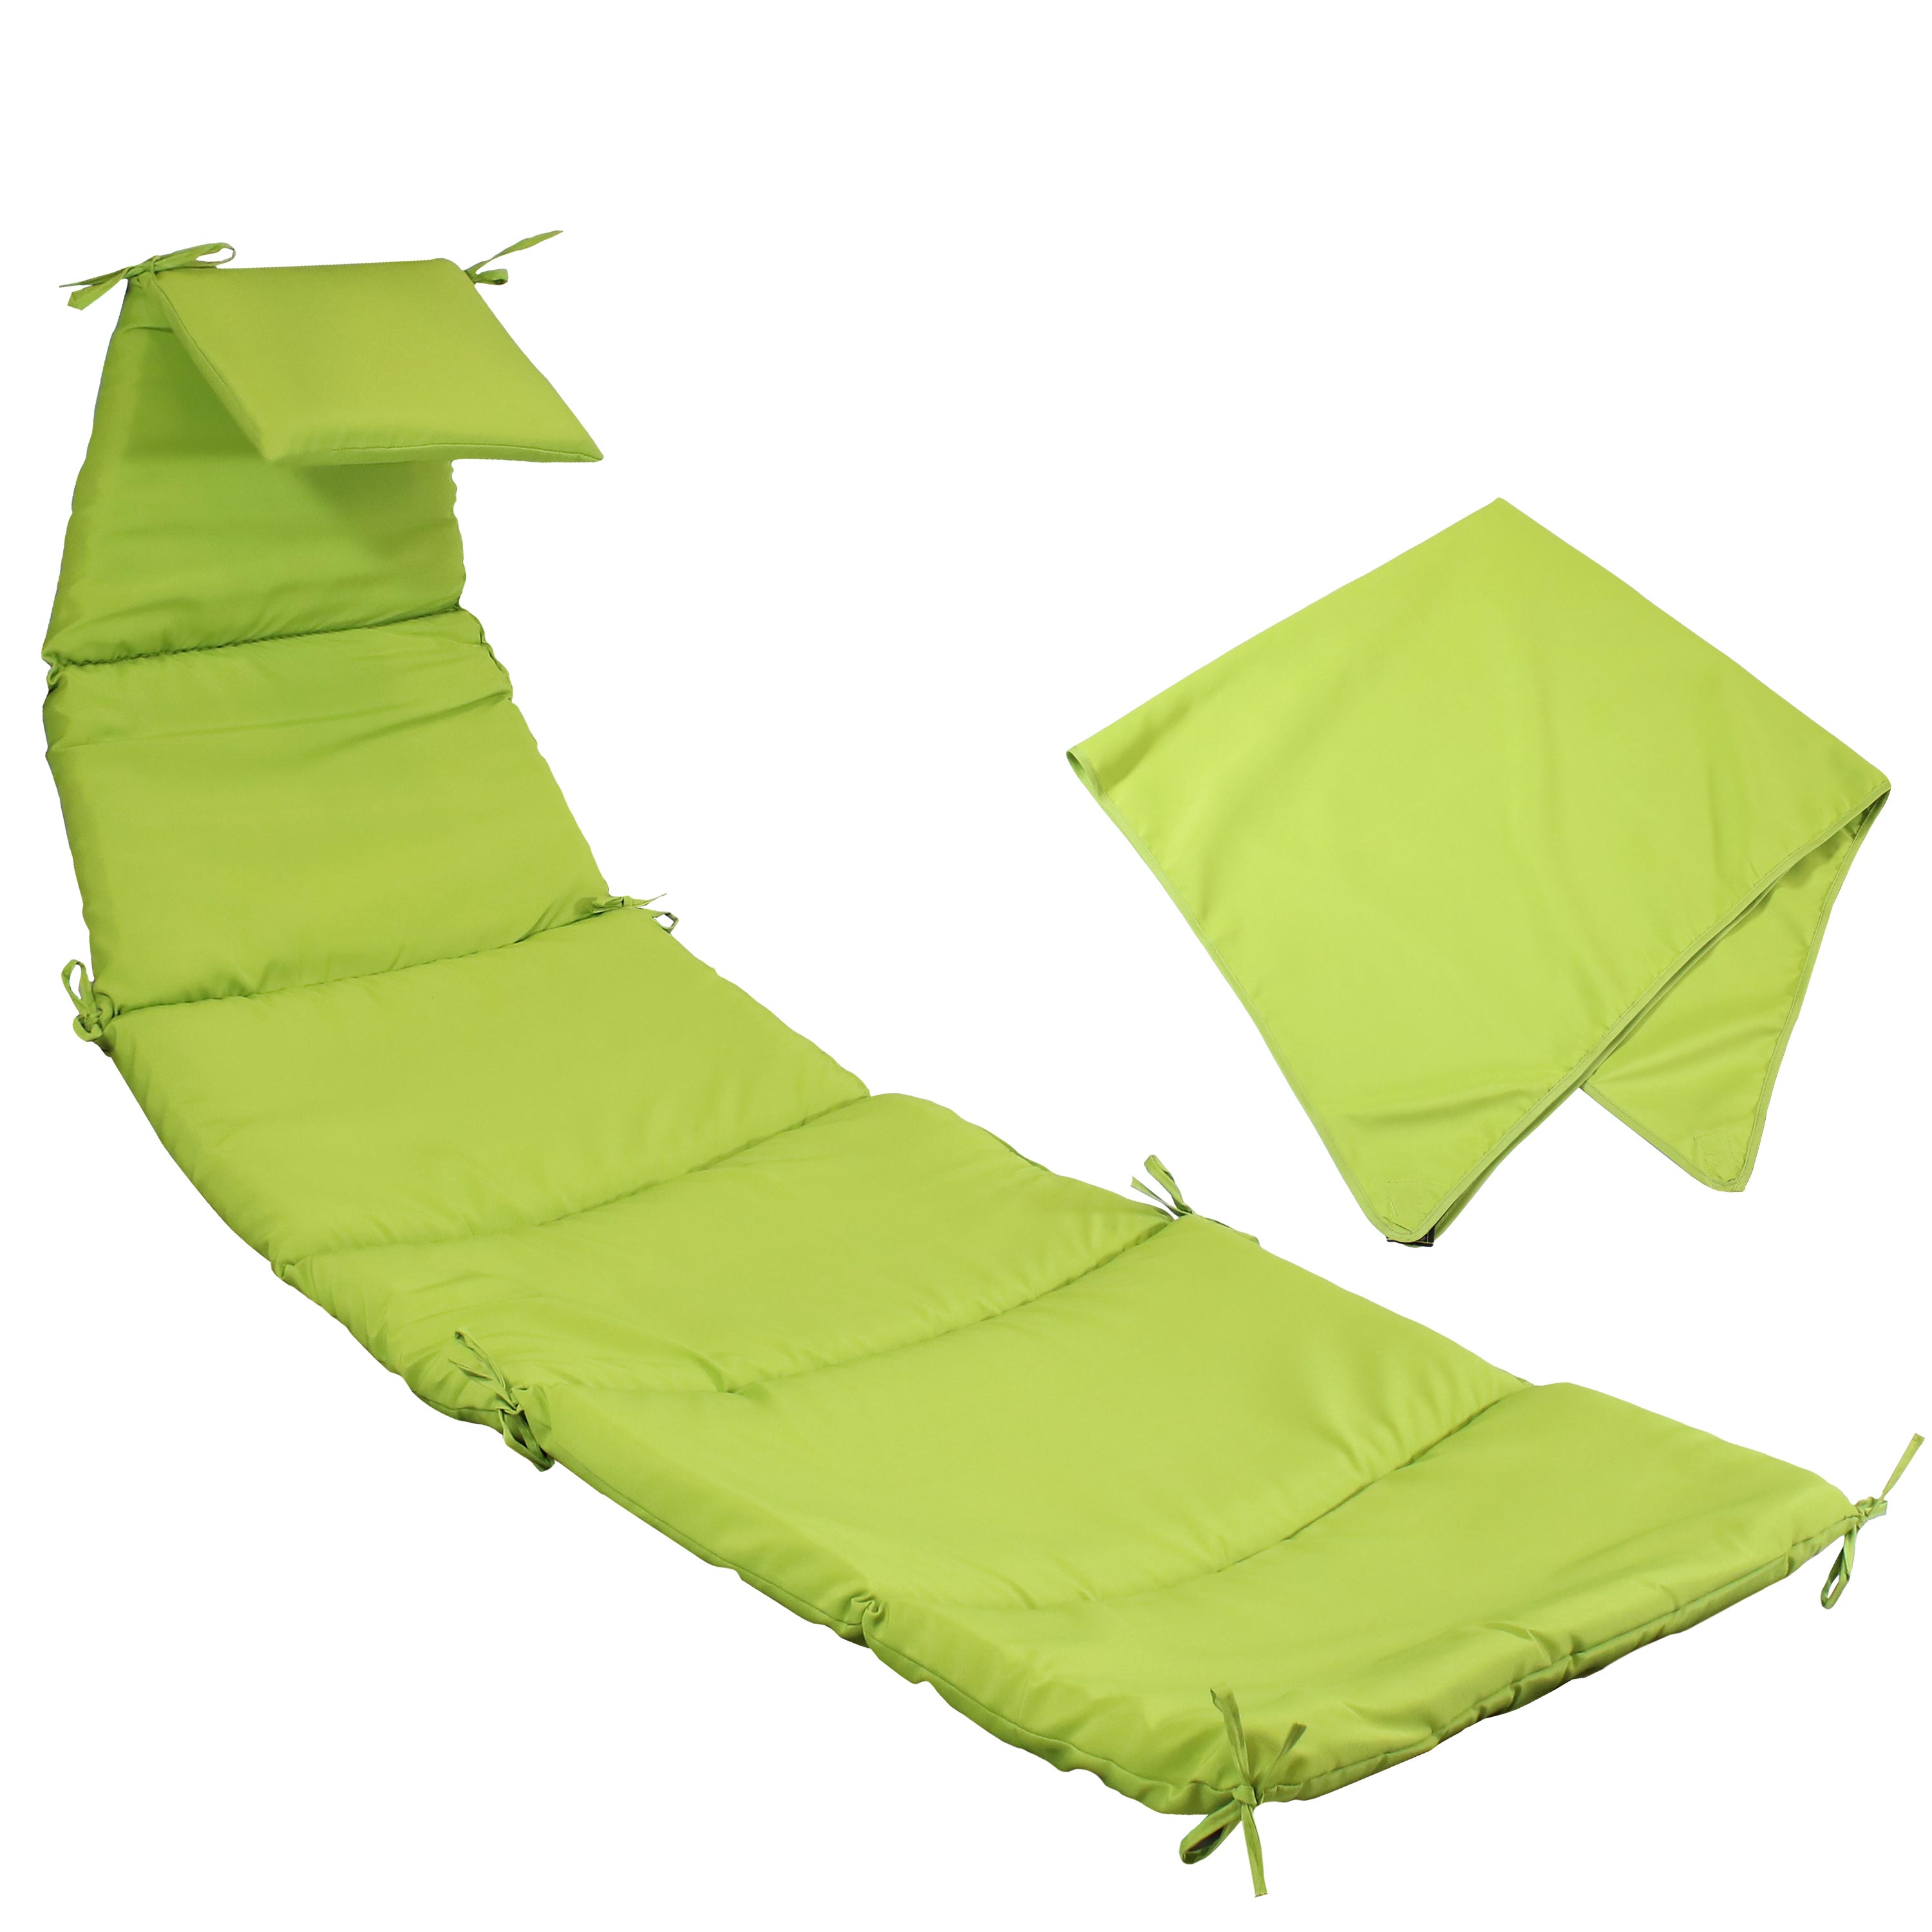 Sunnydaze Hanging Lounge Chair Replacement Cushion and Umbrella, Apple Green